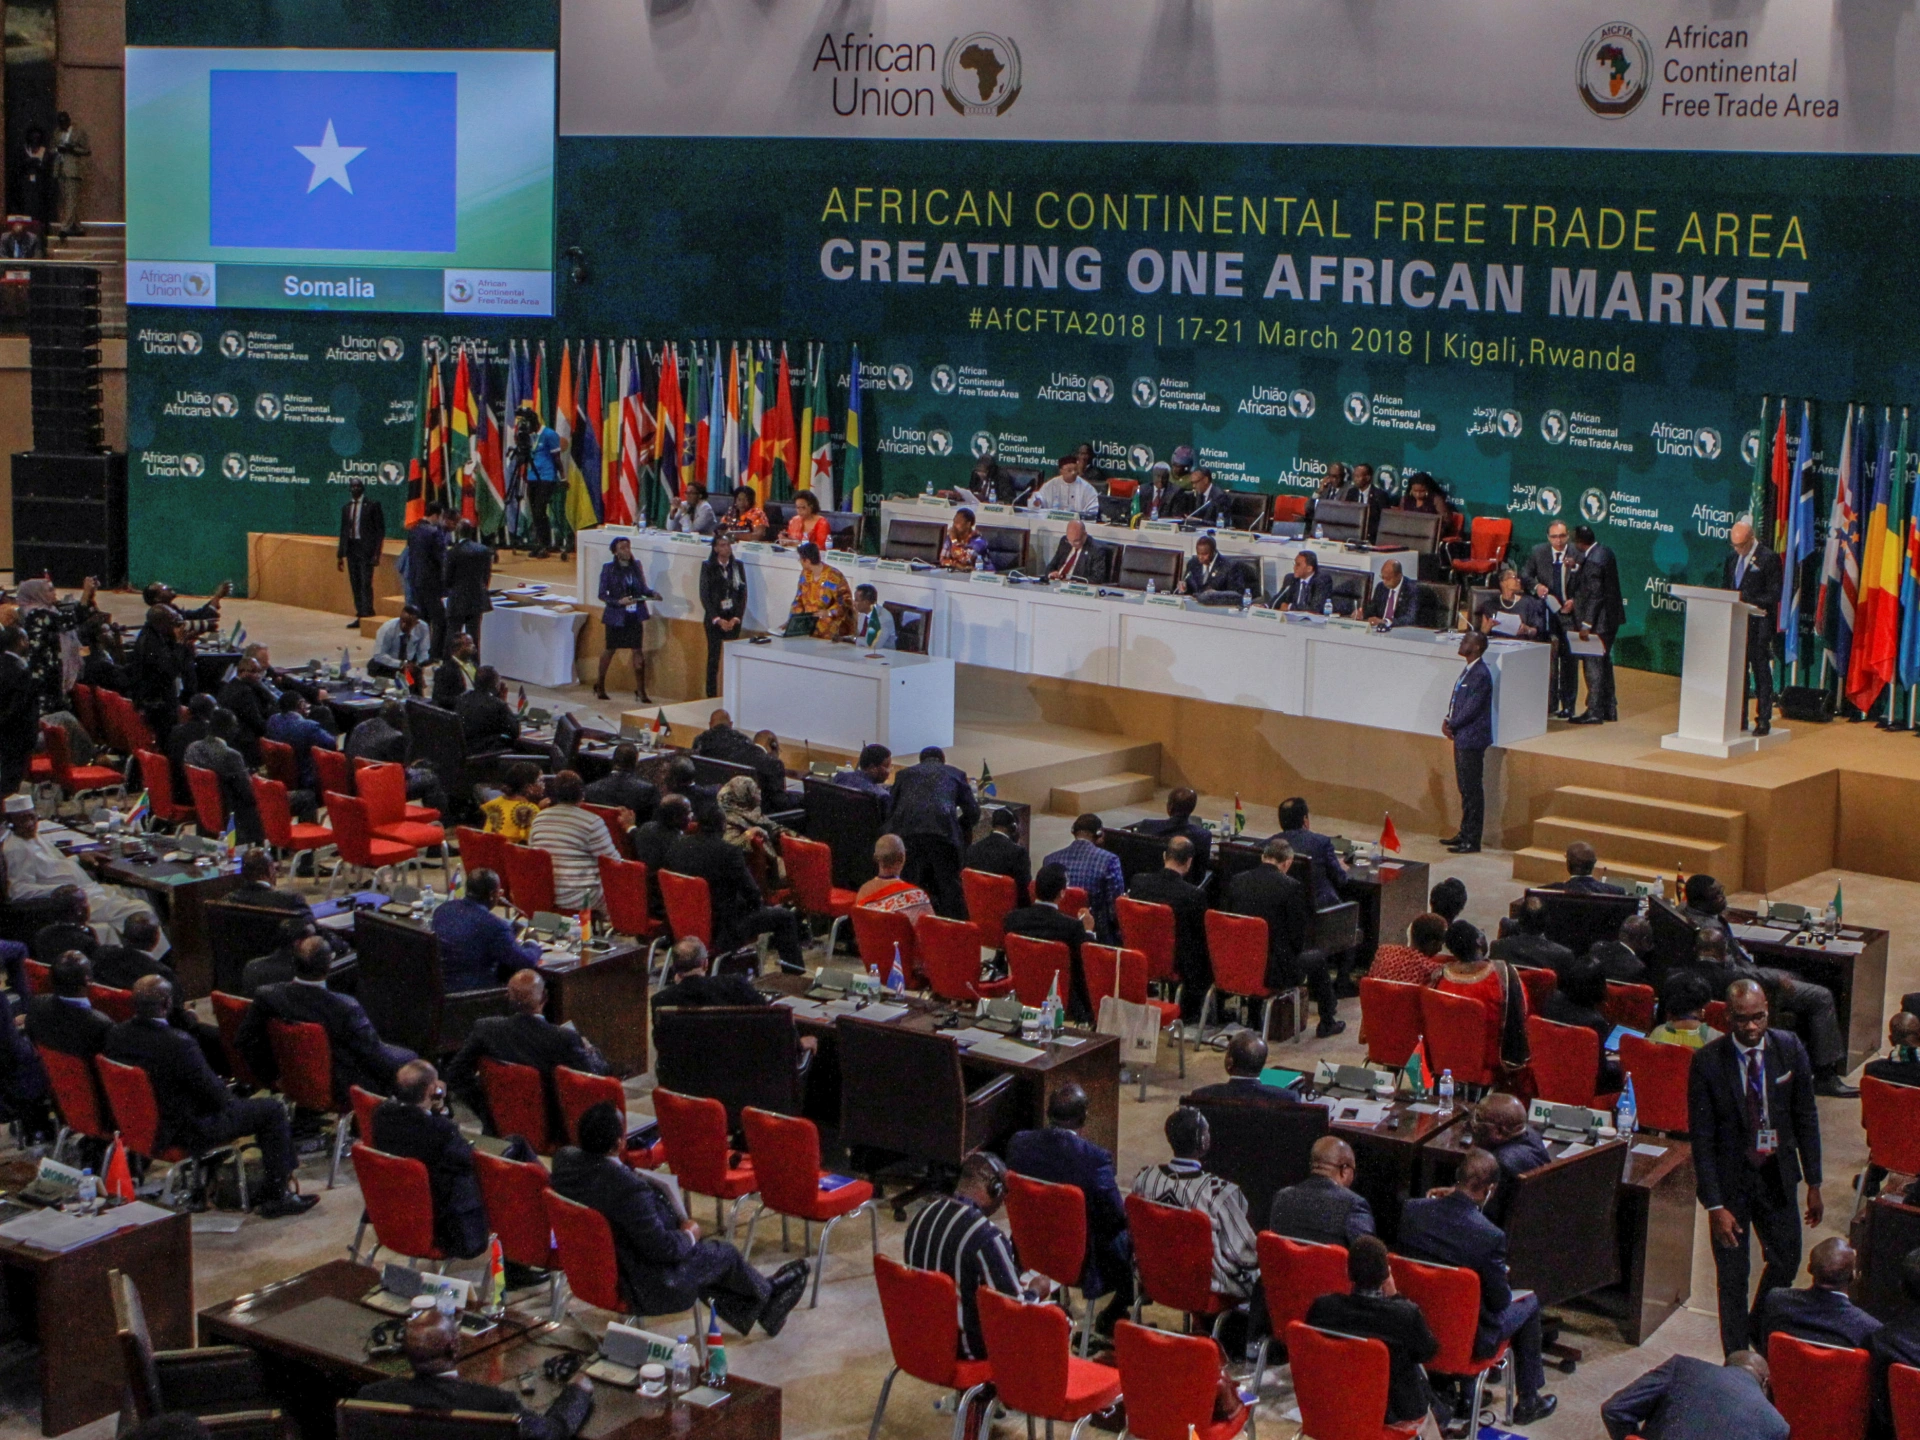 The Impact of the African Continental Free Trade Area on Intra-African Trade and Economic Development